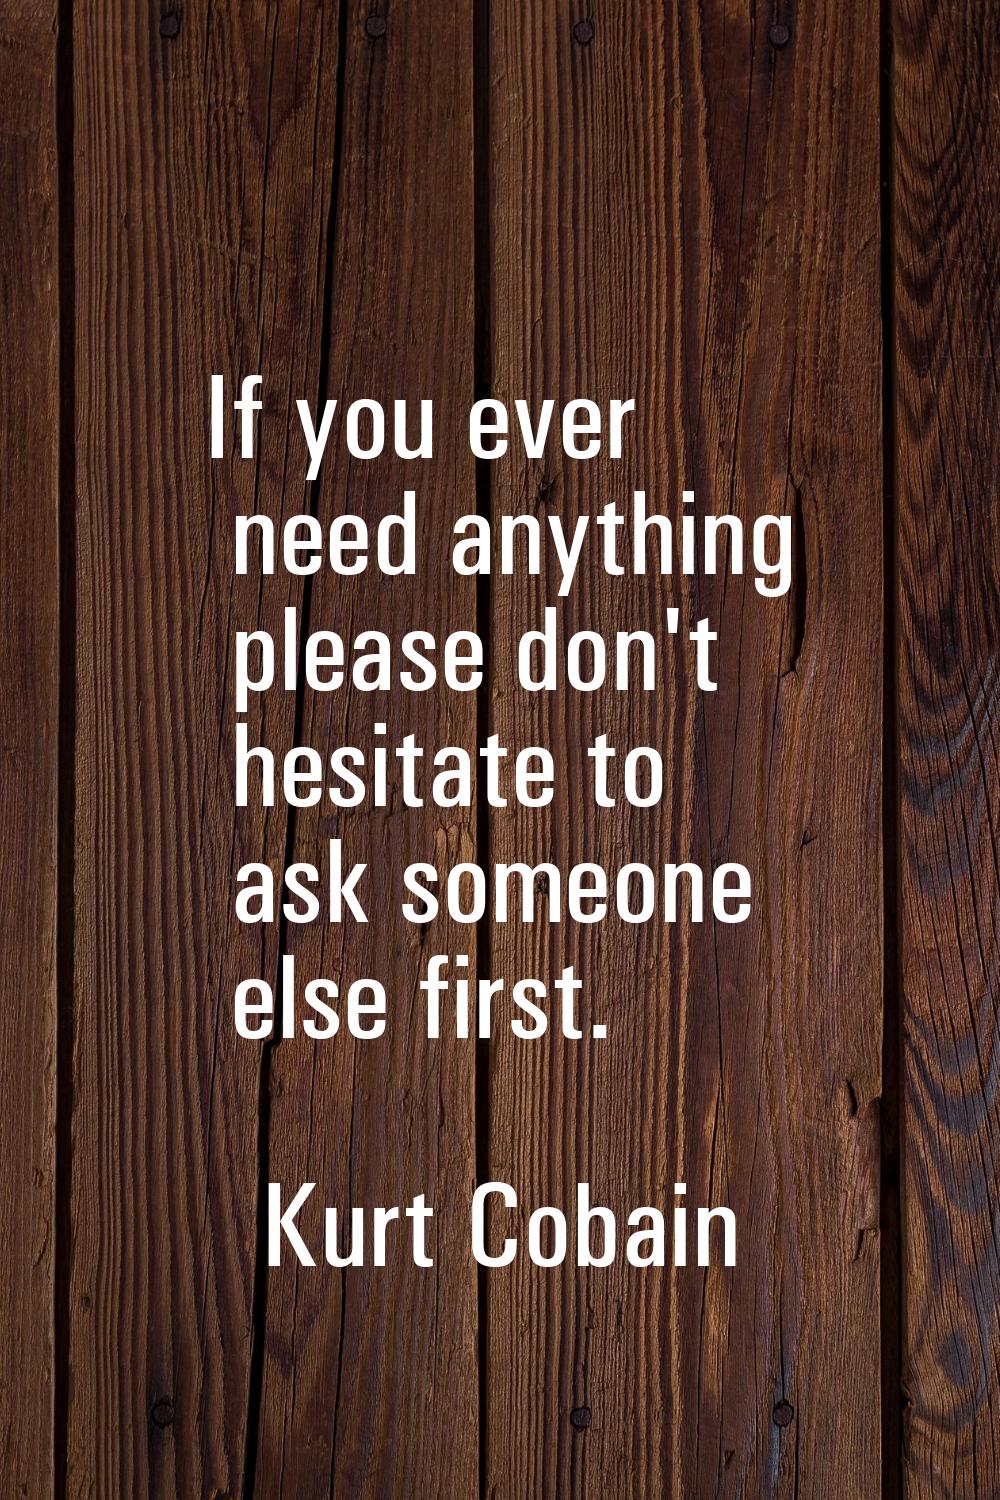 If you ever need anything please don't hesitate to ask someone else first.